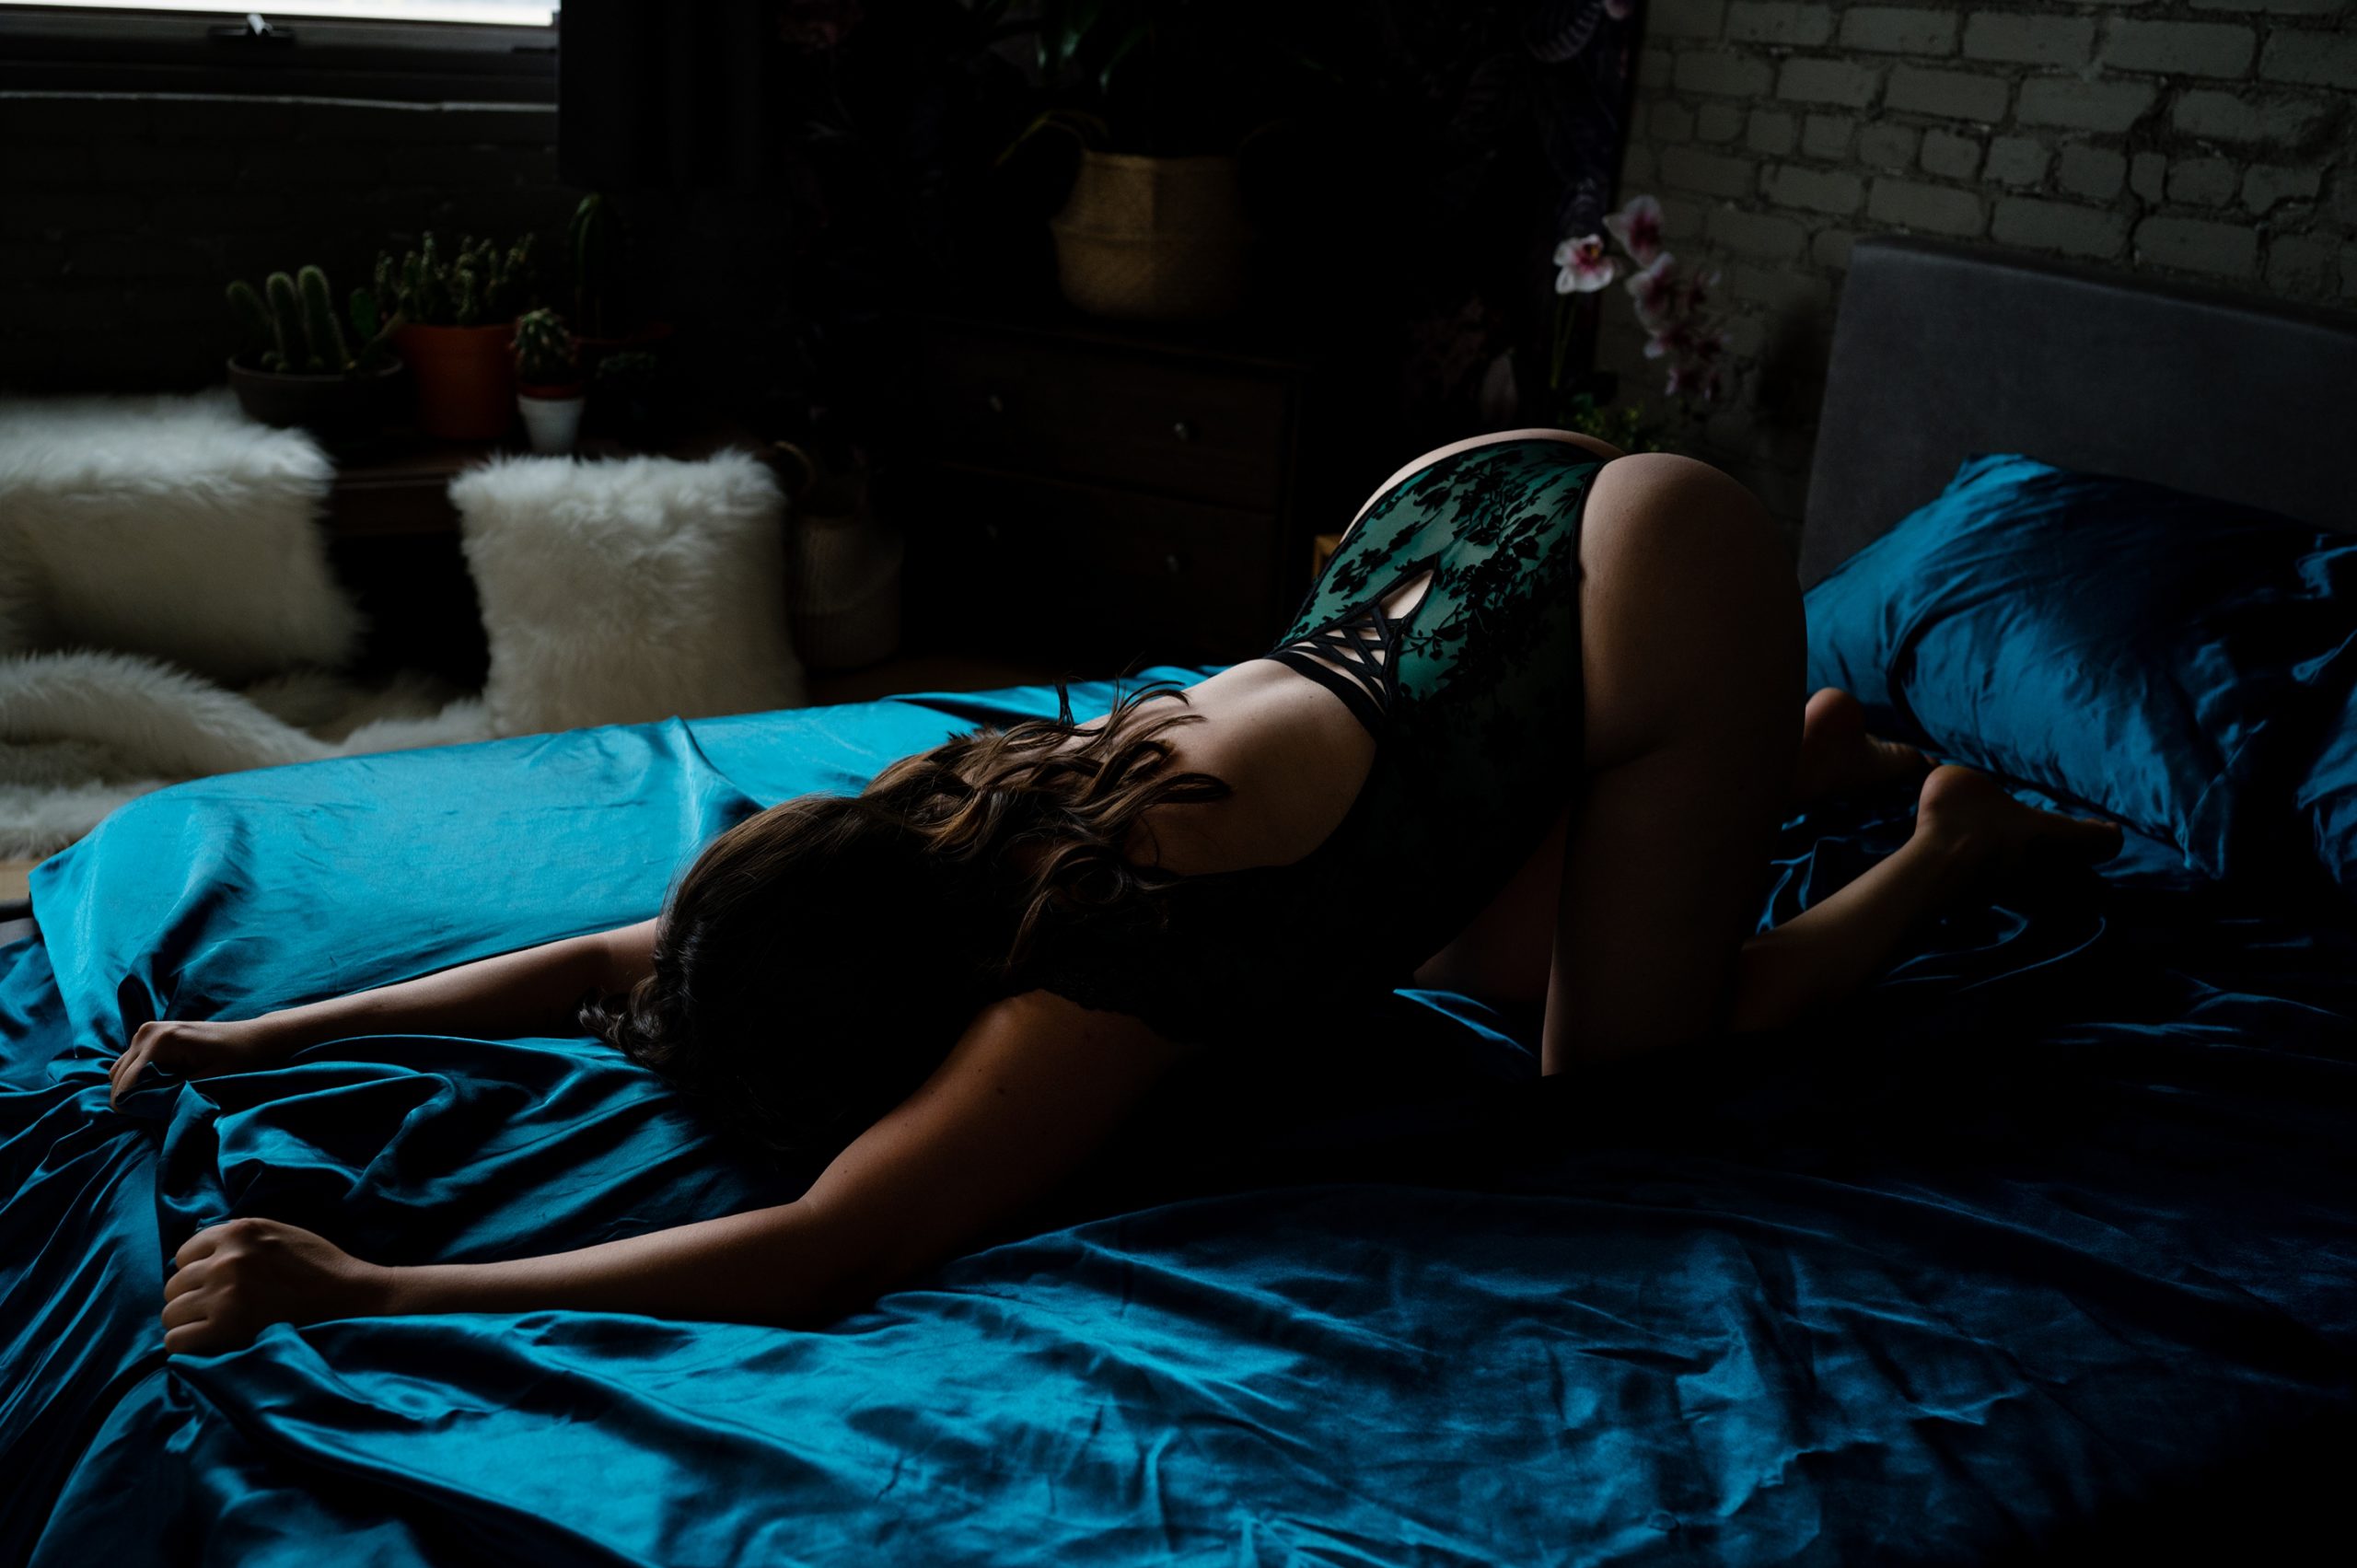 photograph of a woman in a boudoir session she is wearing an emerald green lingerie set and is face down on the bed